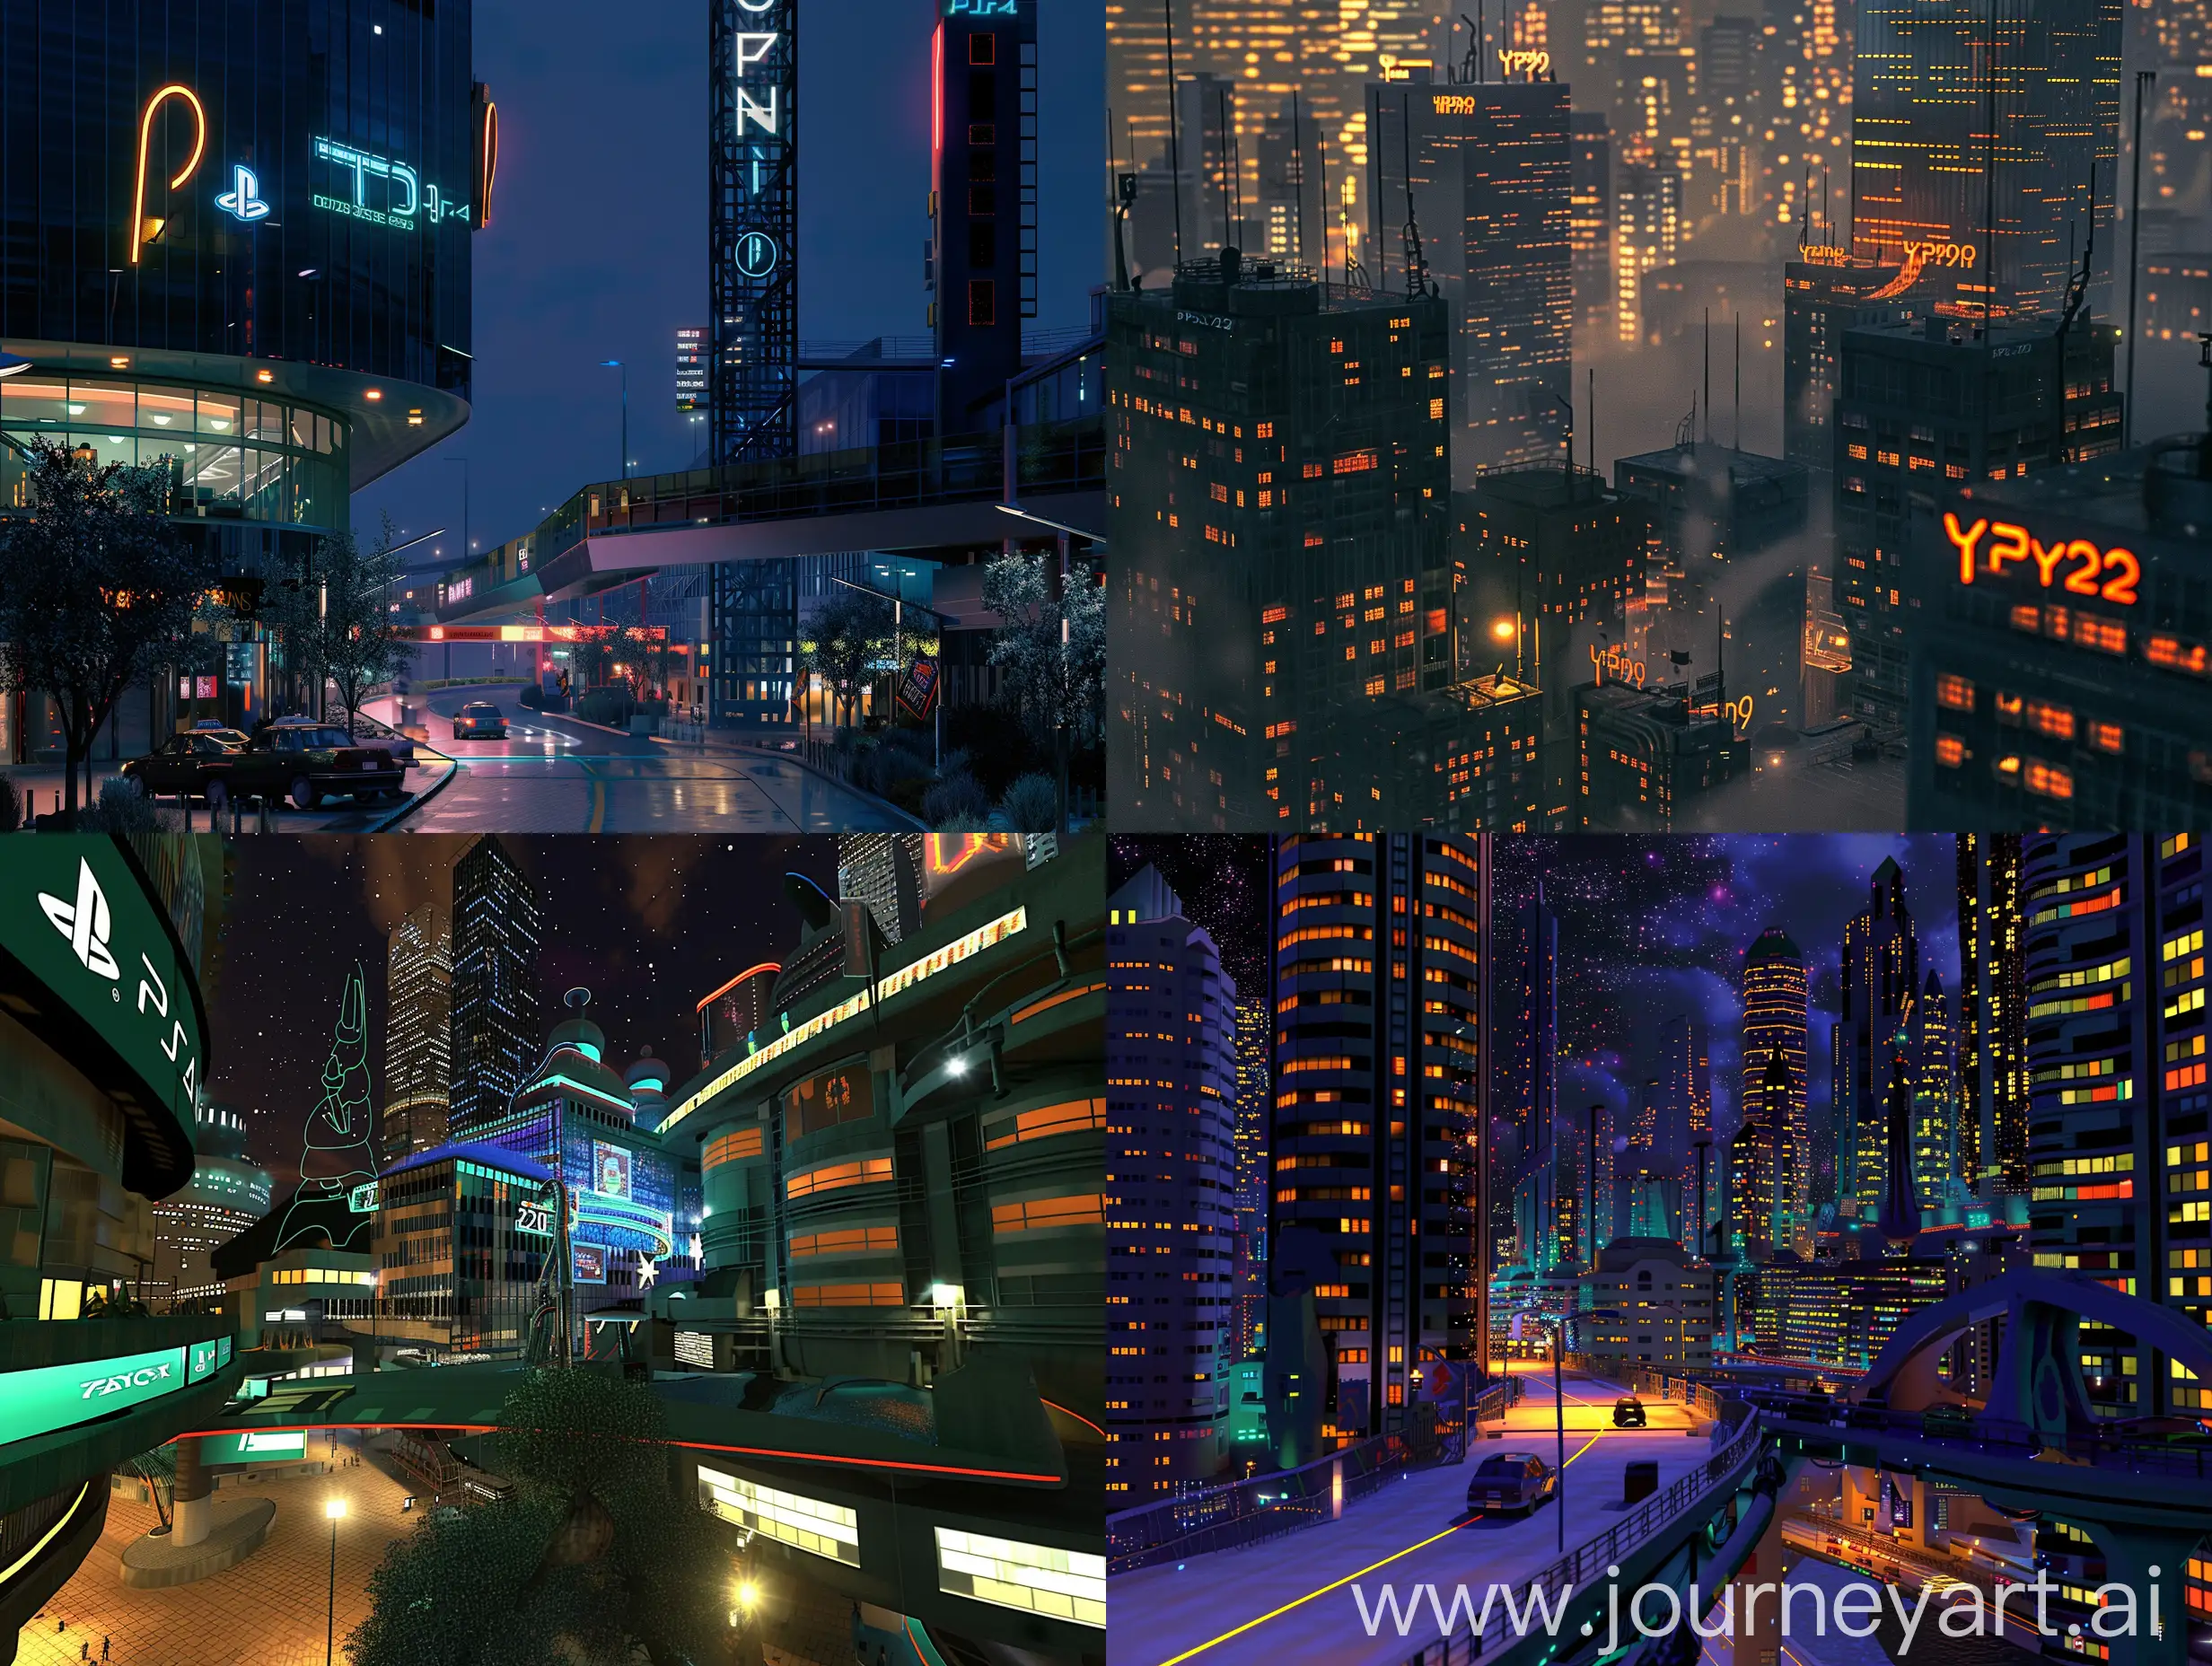  a city, genre, retro, modern, futurism, y2k aesthetic, nostalgic trend, environment, PlayStation 2 2000s graphics, render, night time